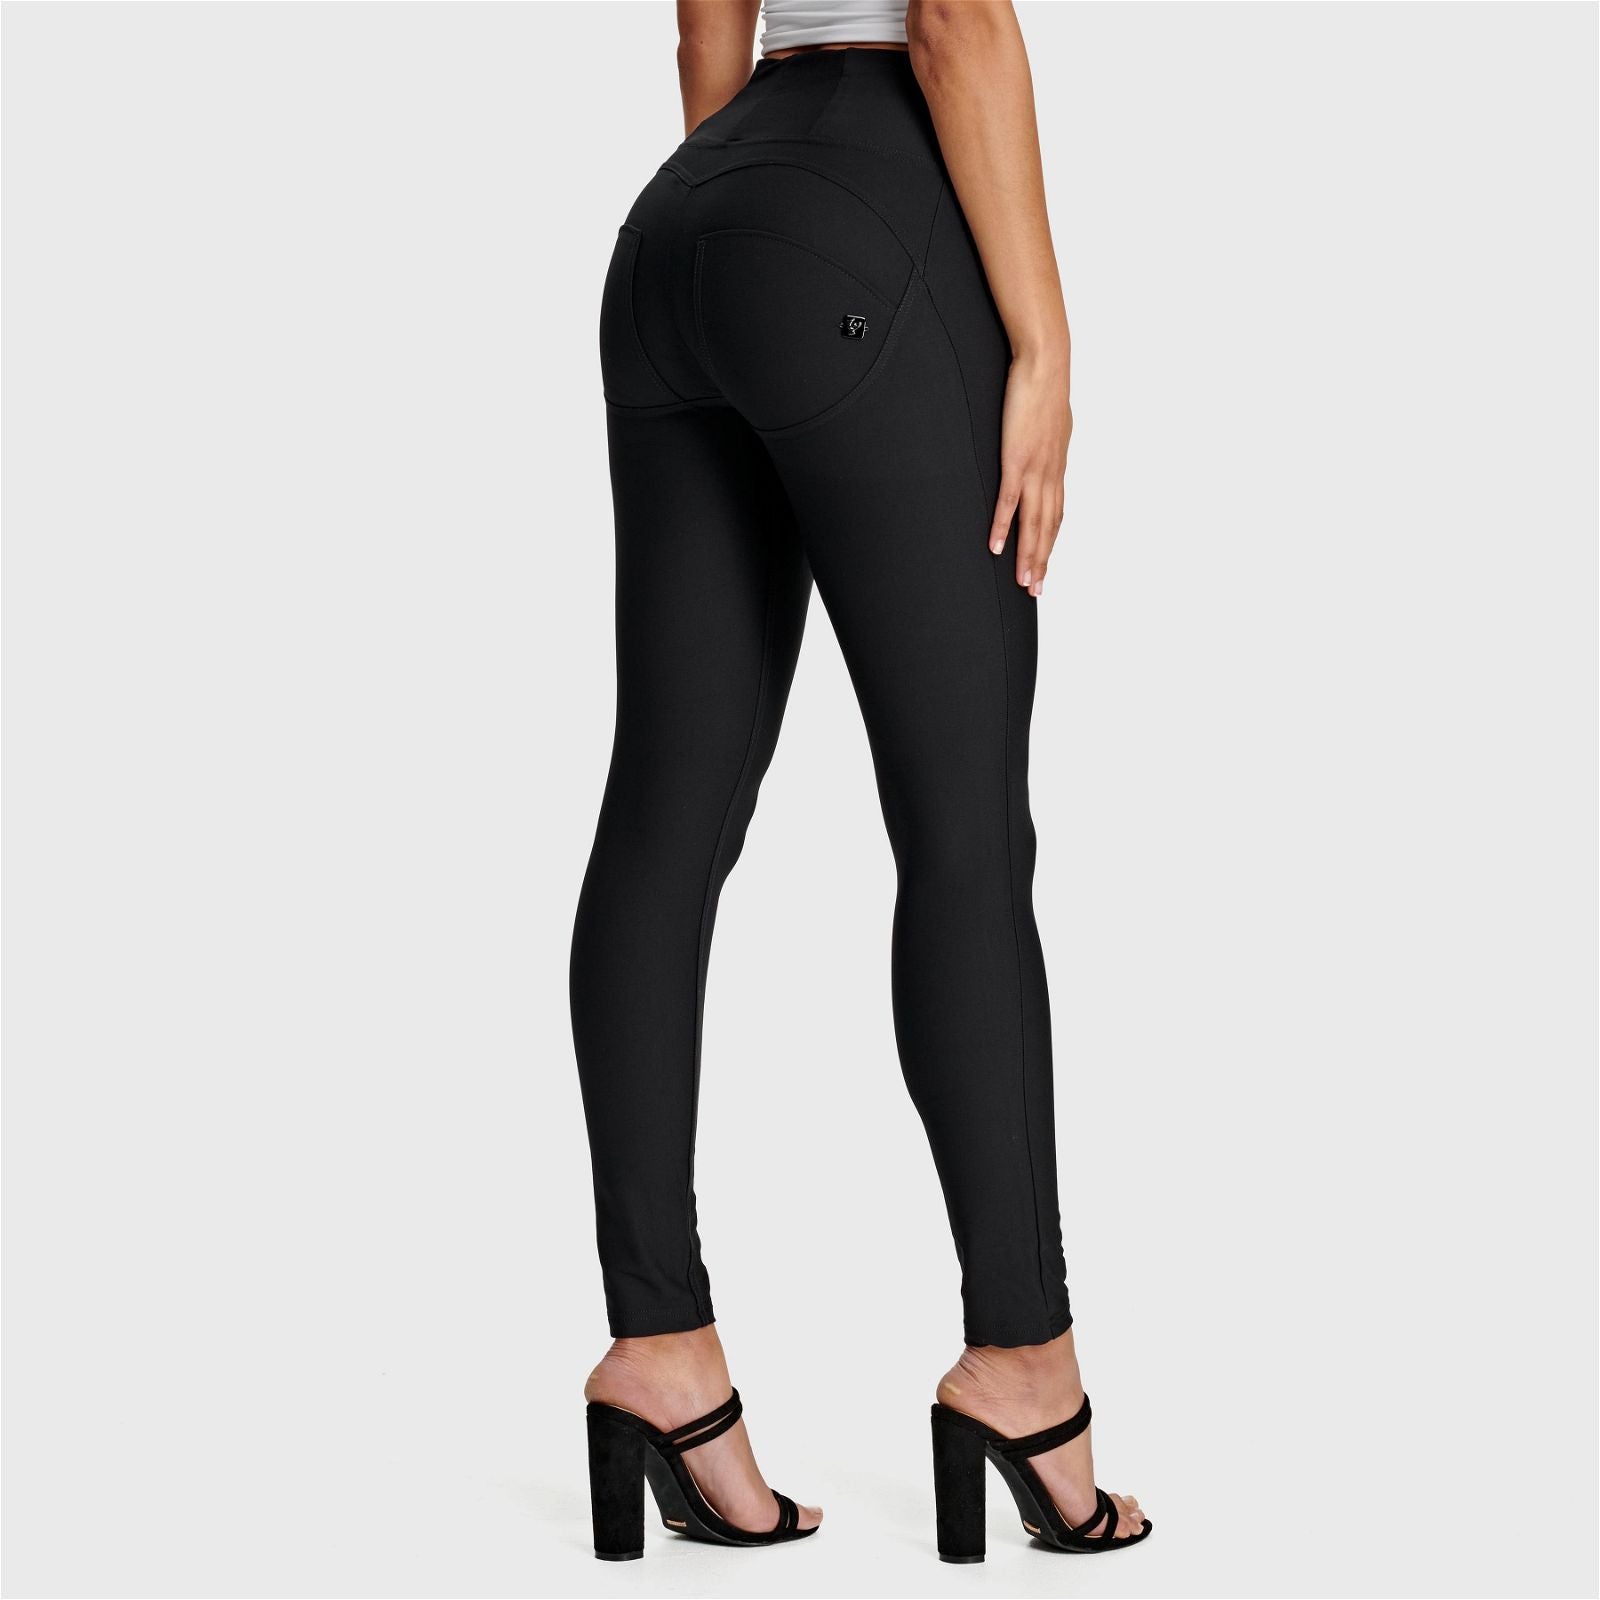 WR.UP® Thick Layered Diwo Pro - High Waisted - 7/8 Length - Black 2